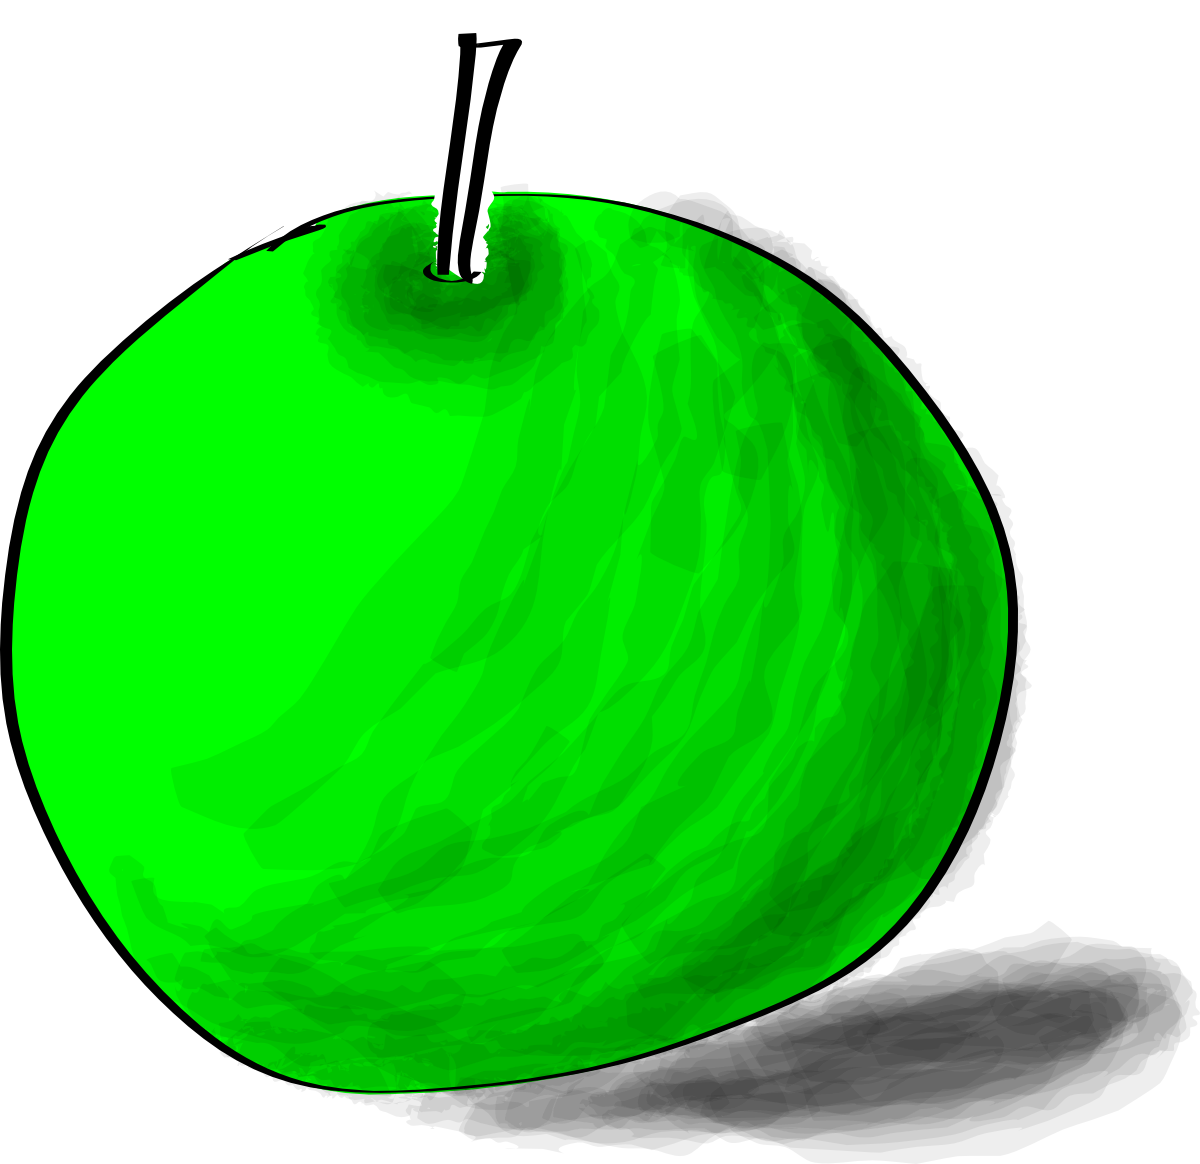 Drawing of a green apple